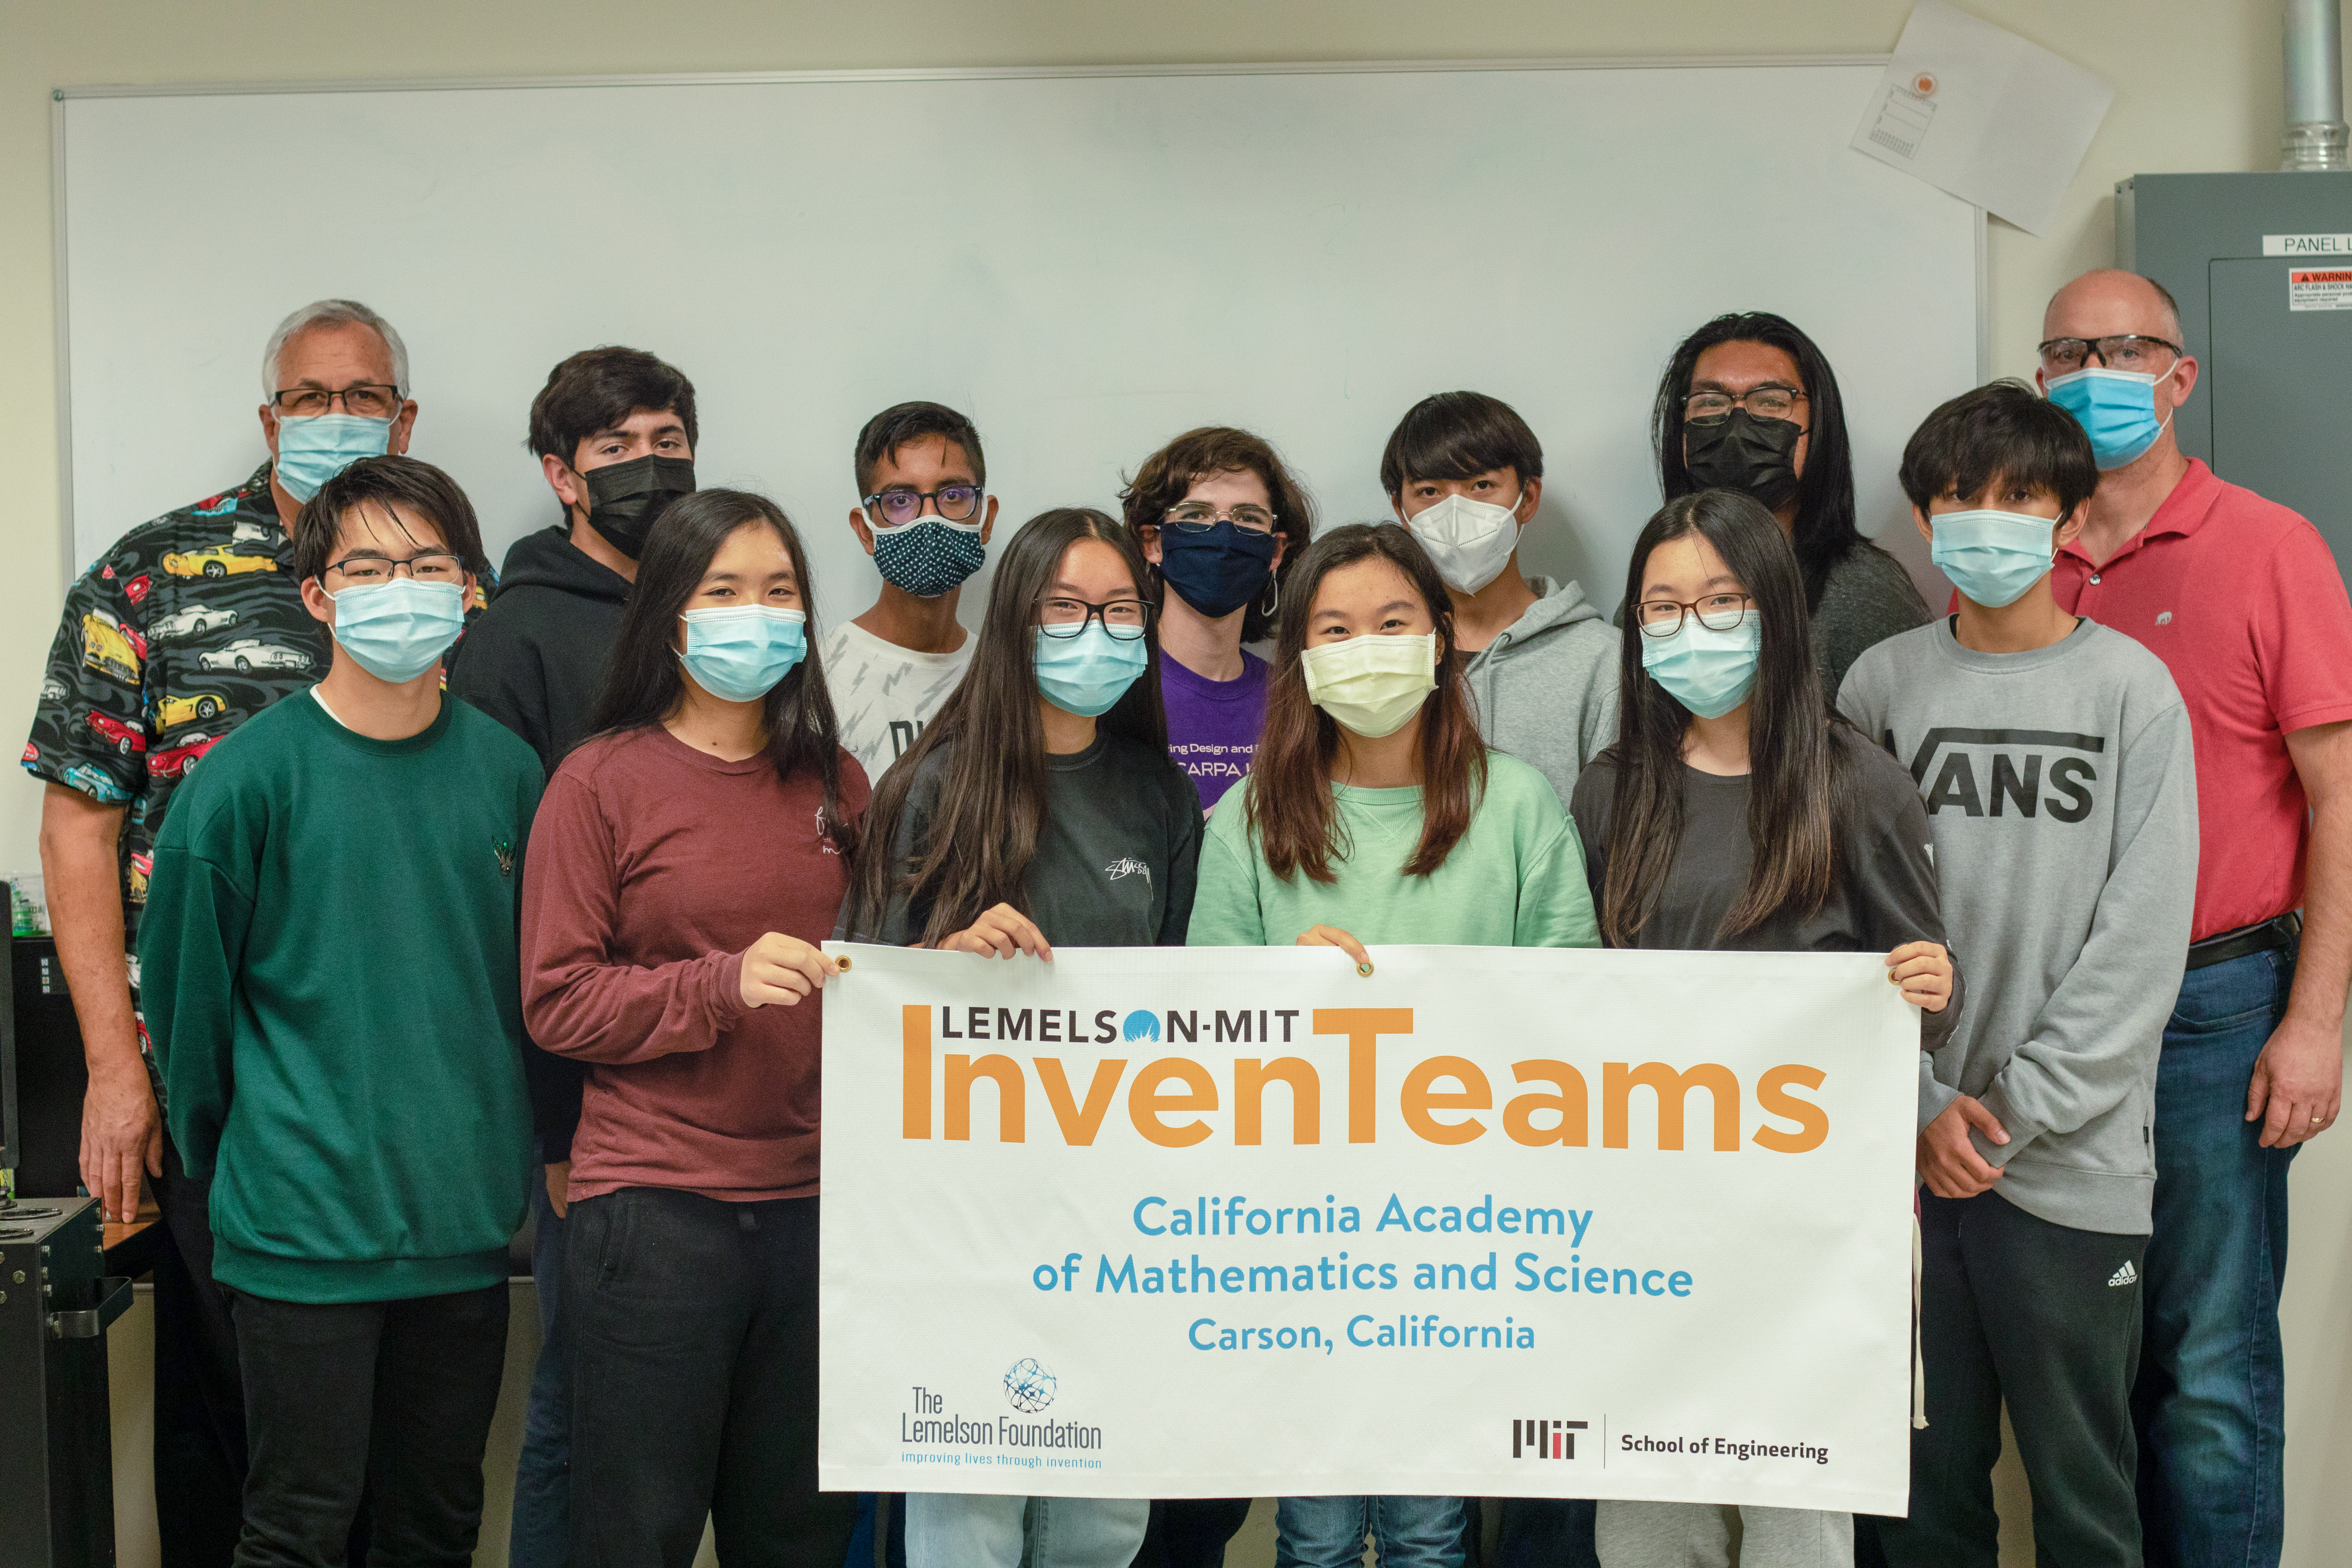 CA Academy of Mathematics & Science InvenTeam with their banner